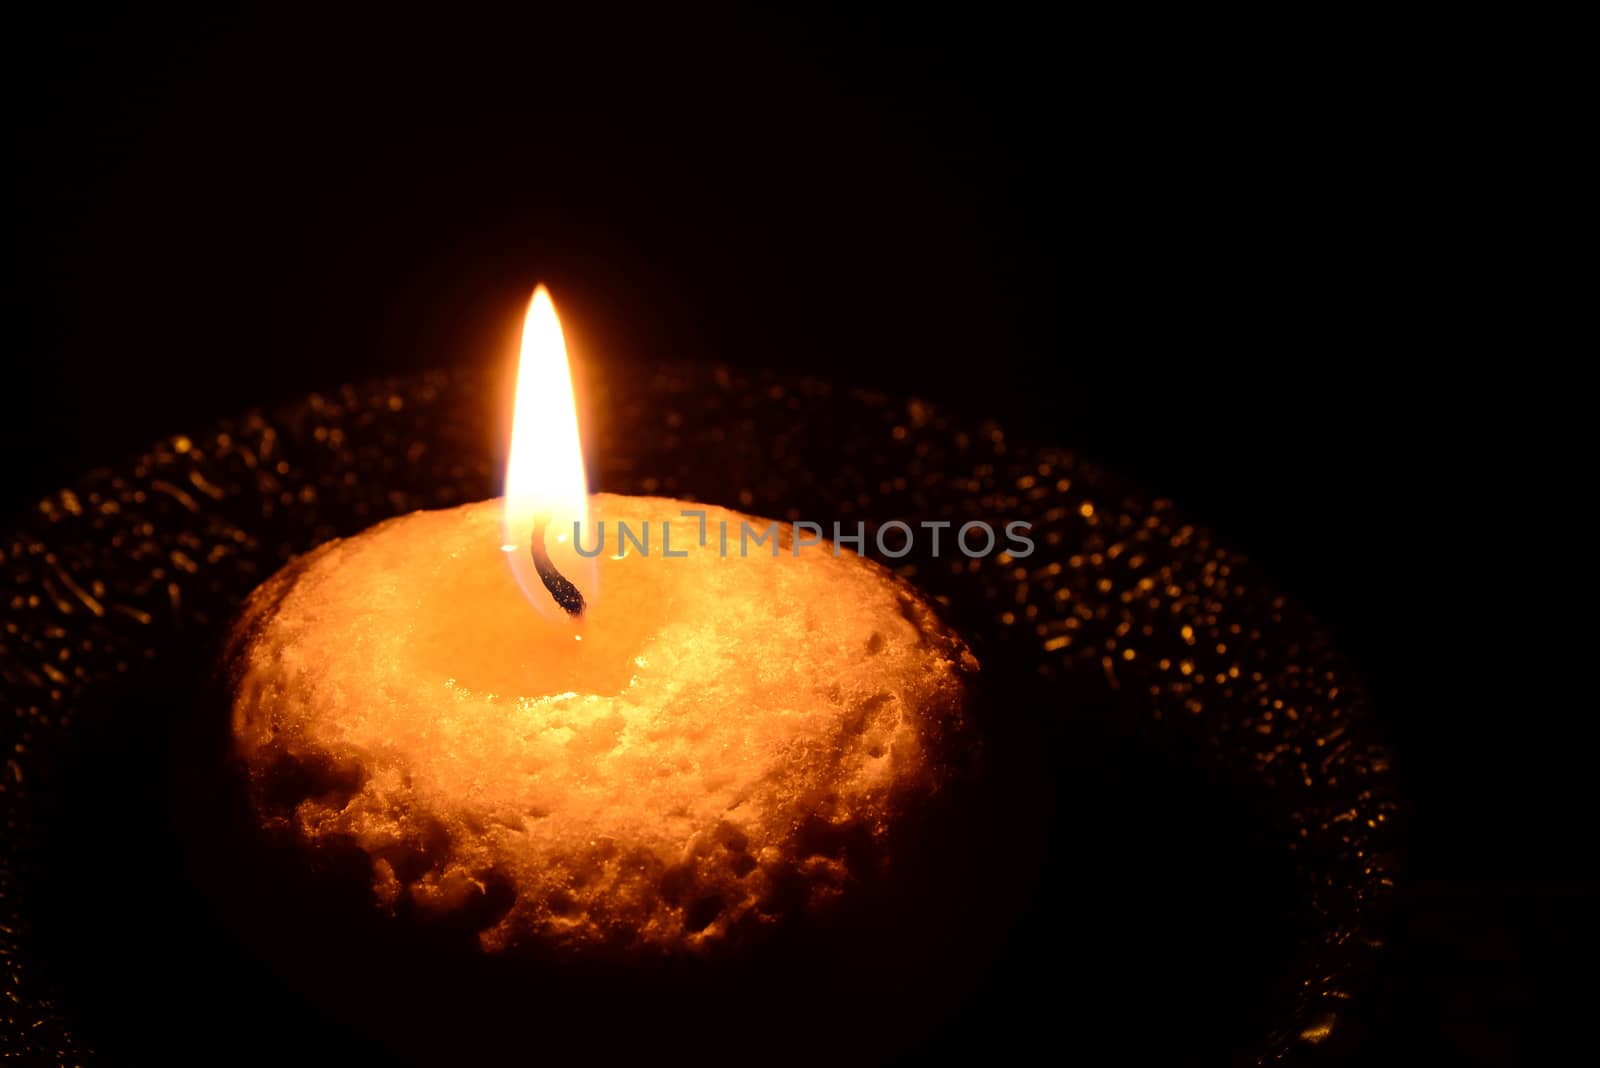 Photo of a white candle on a green plate burning on a black background.